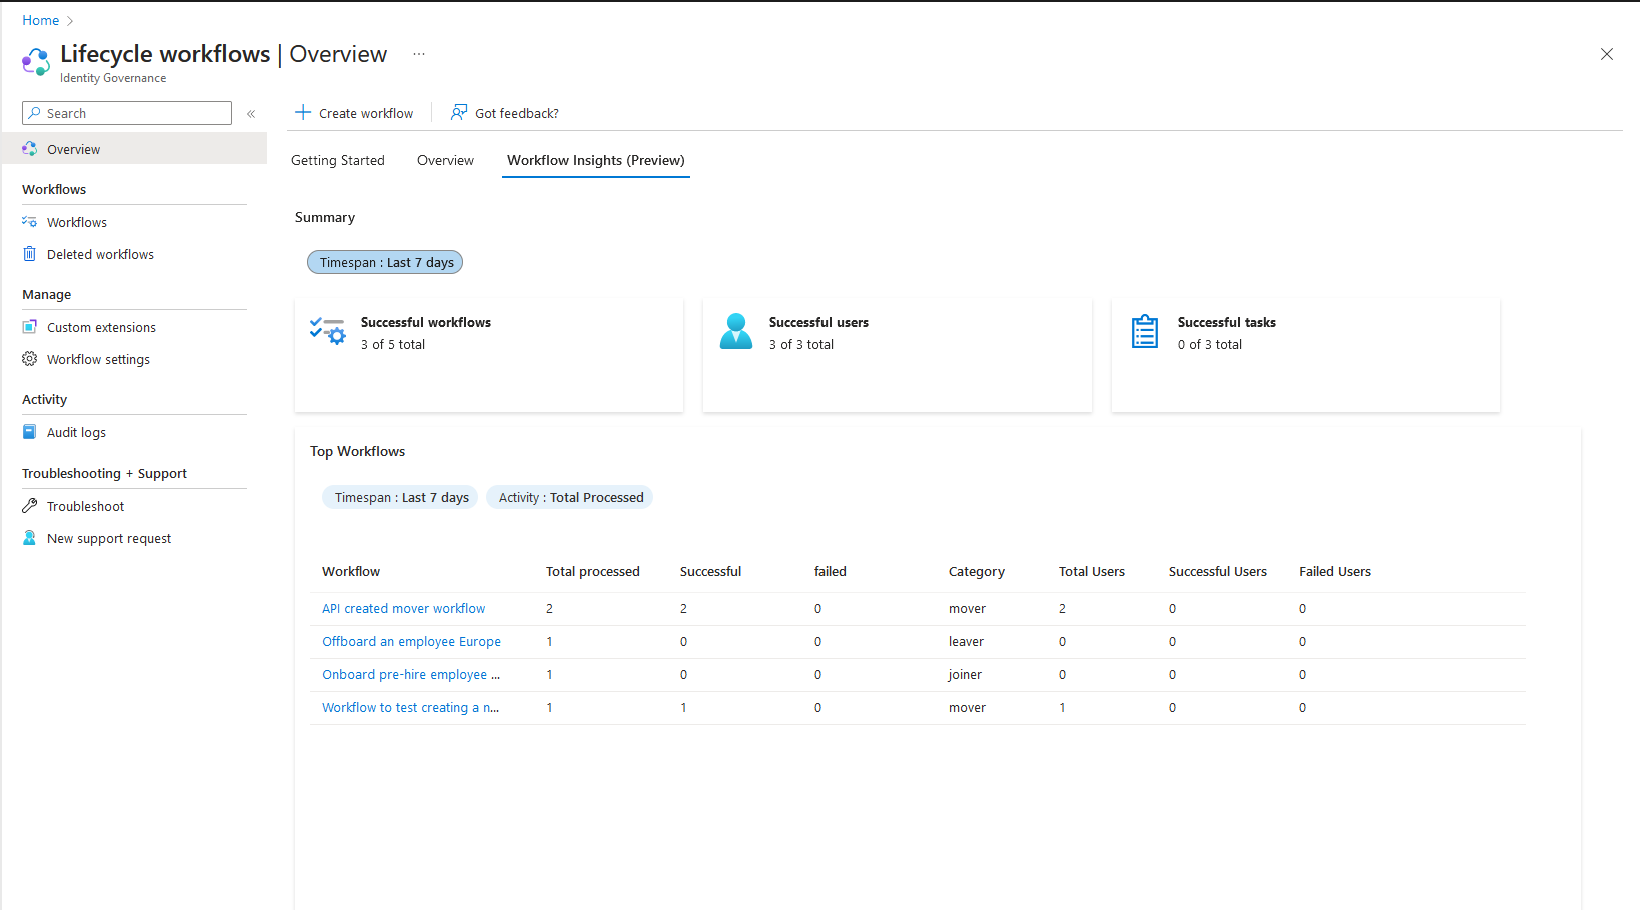 Screenshot of the Workflow Insights page.